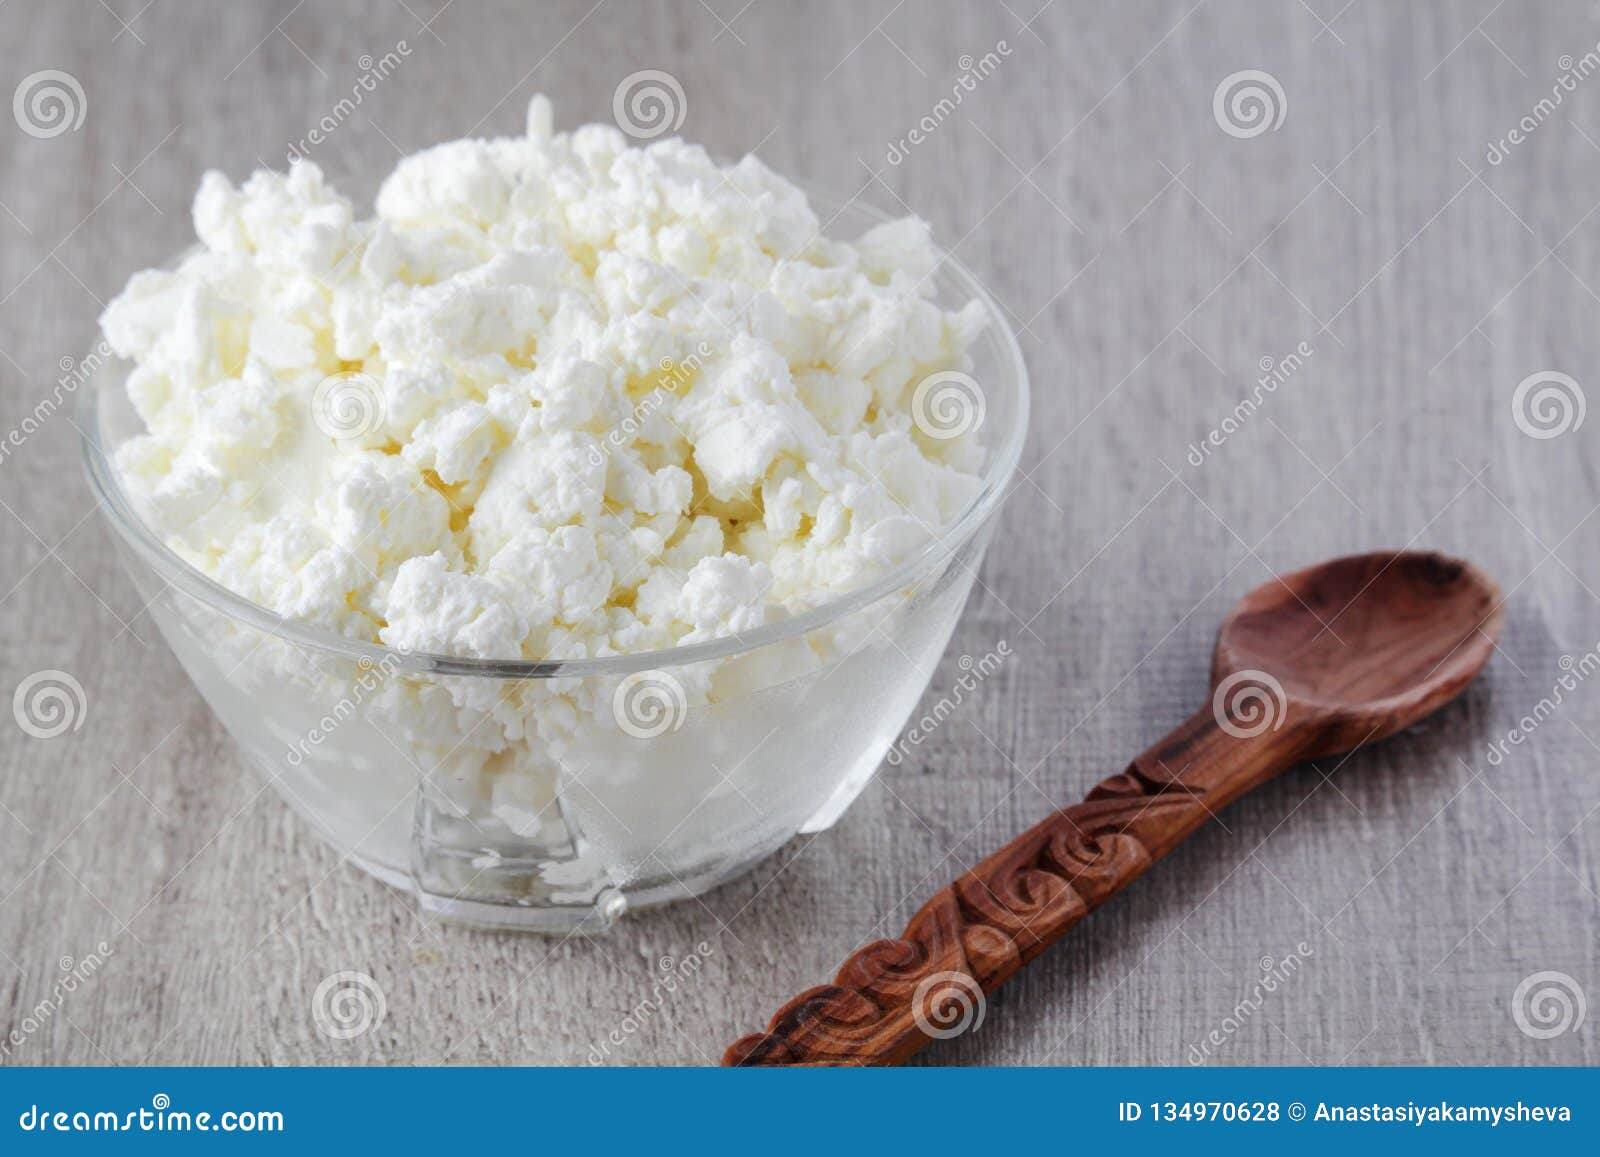 A Bowl With Plain Russian Cottage Cheese Called Tvorog Stock Photo